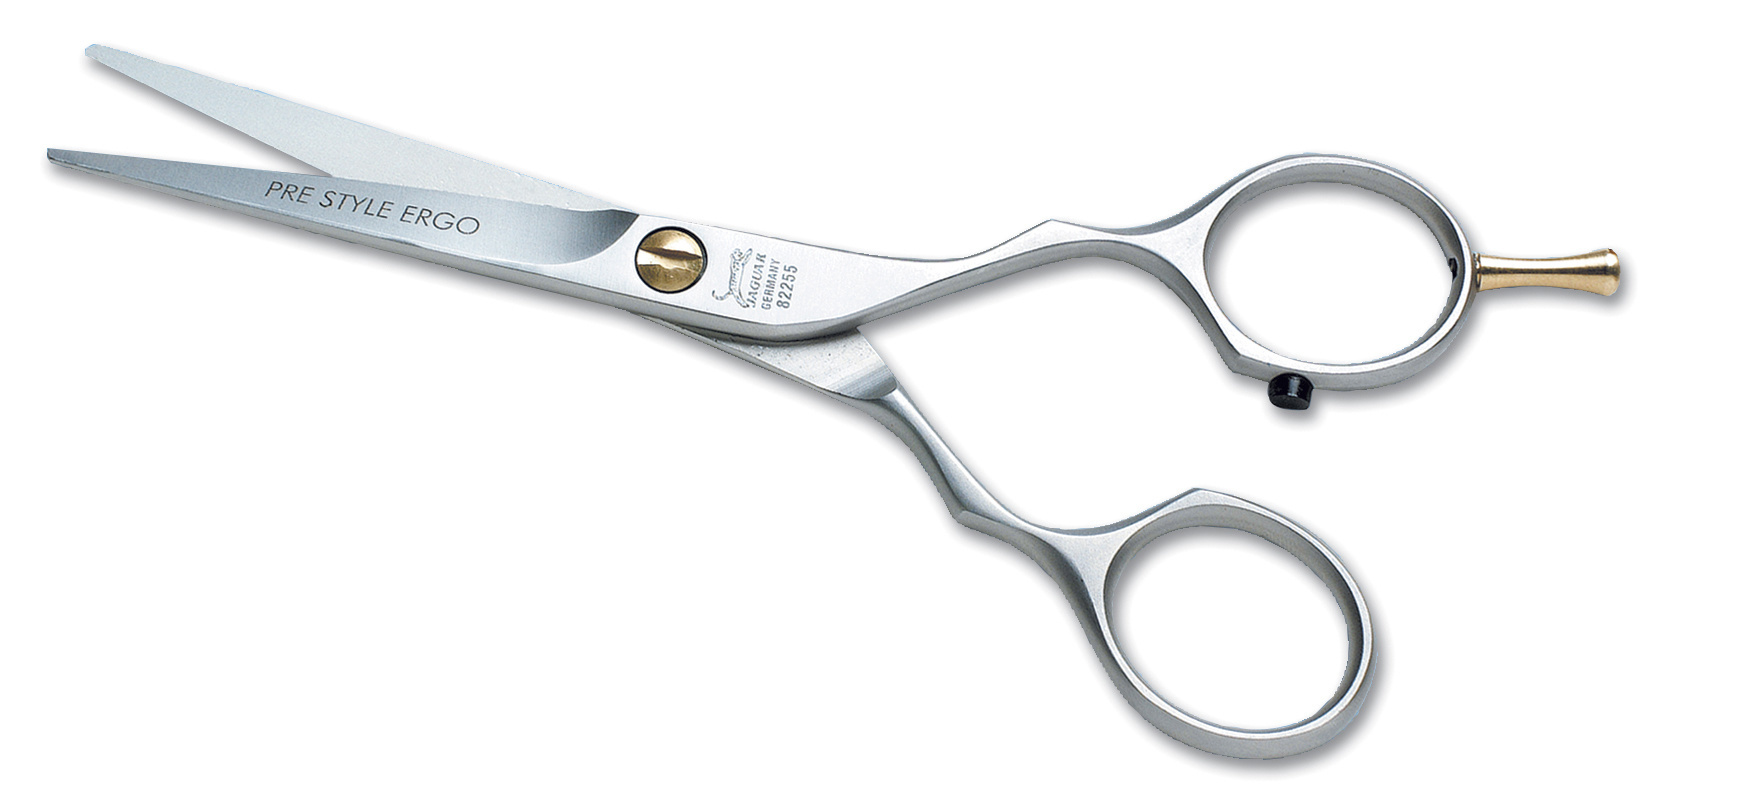 Professional Shears Stainless Steel ERGO